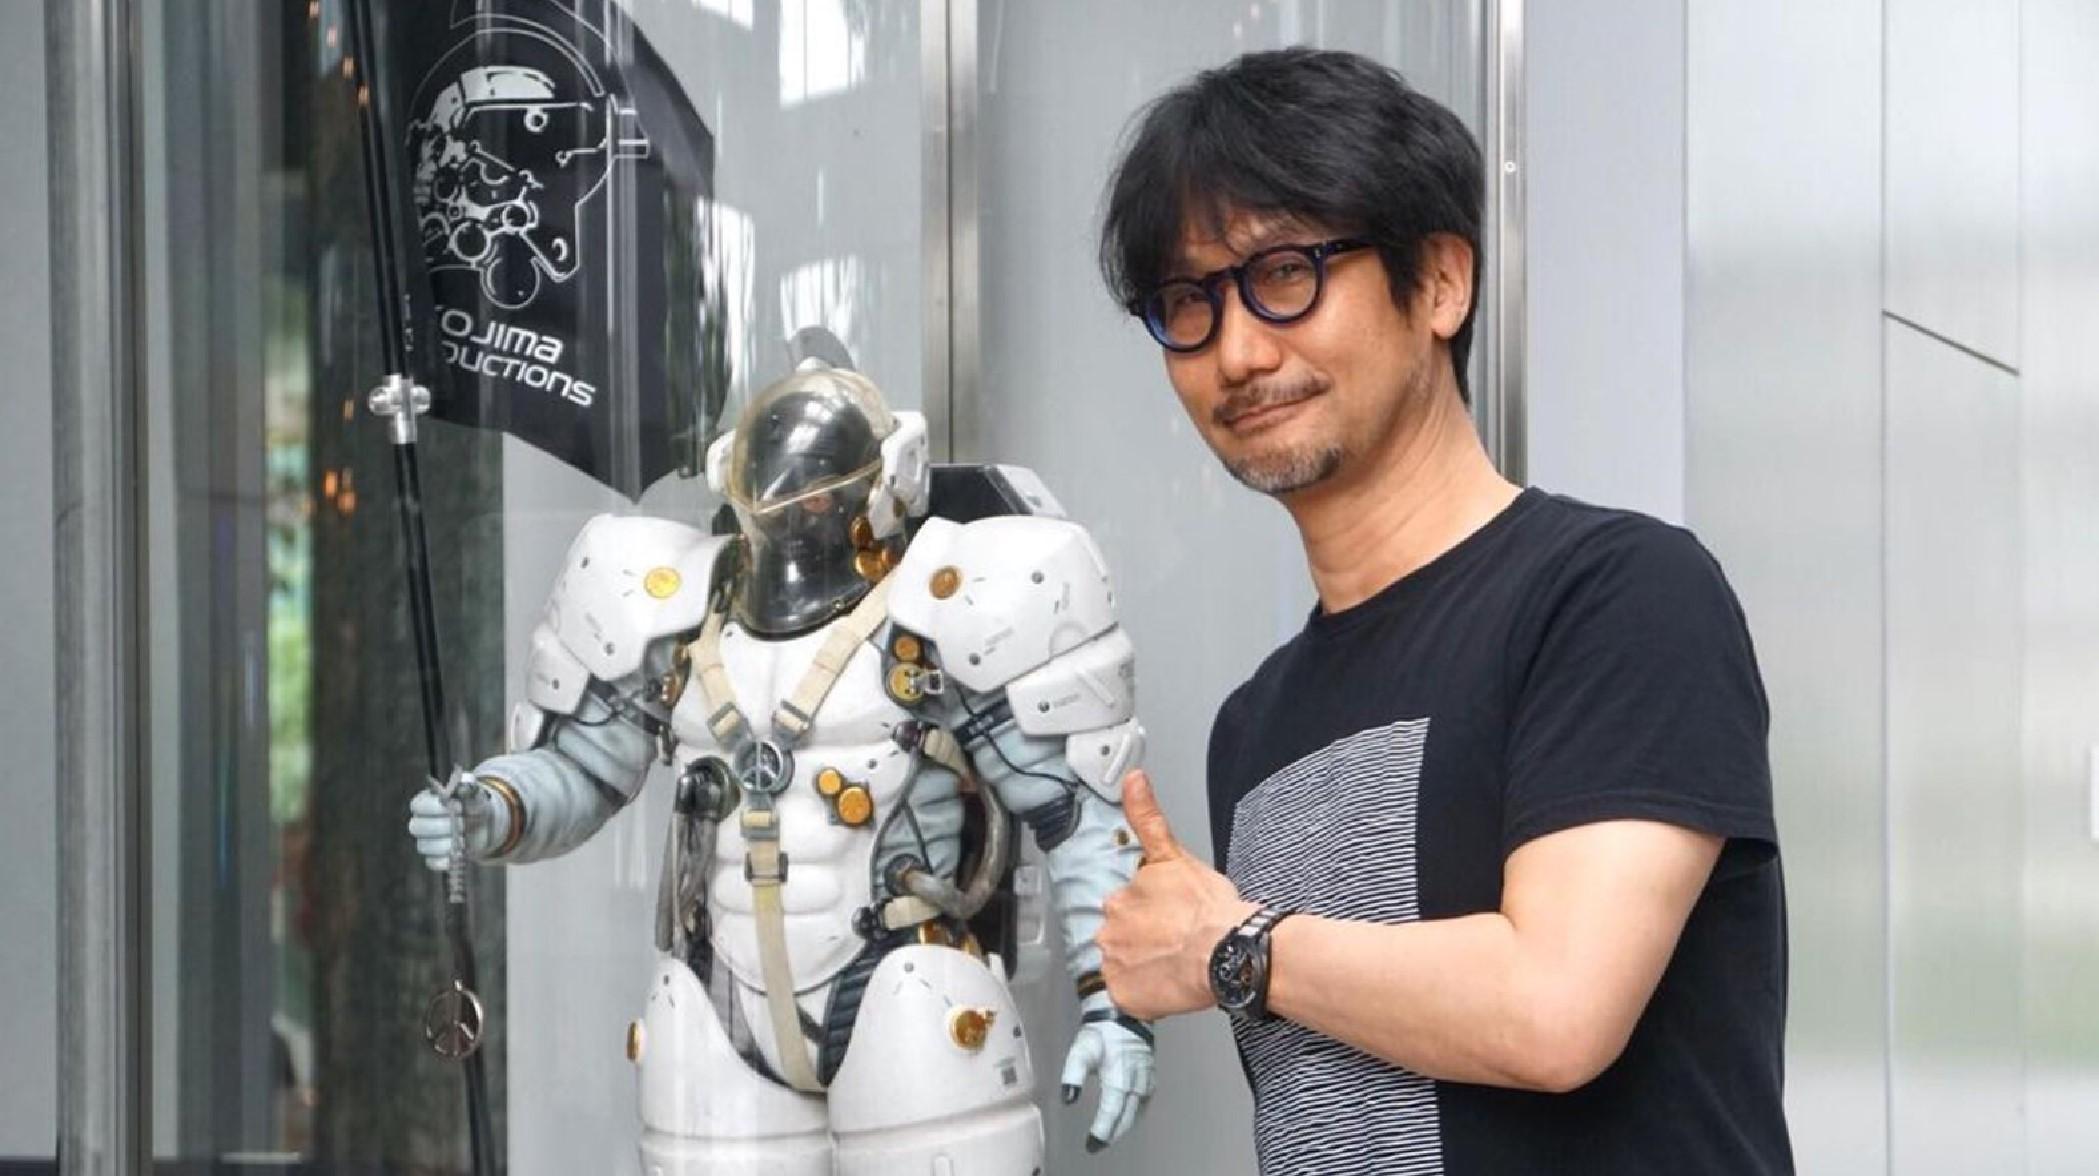 Hideo Kojima on 'Death Stranding' and the art of cinematic video games